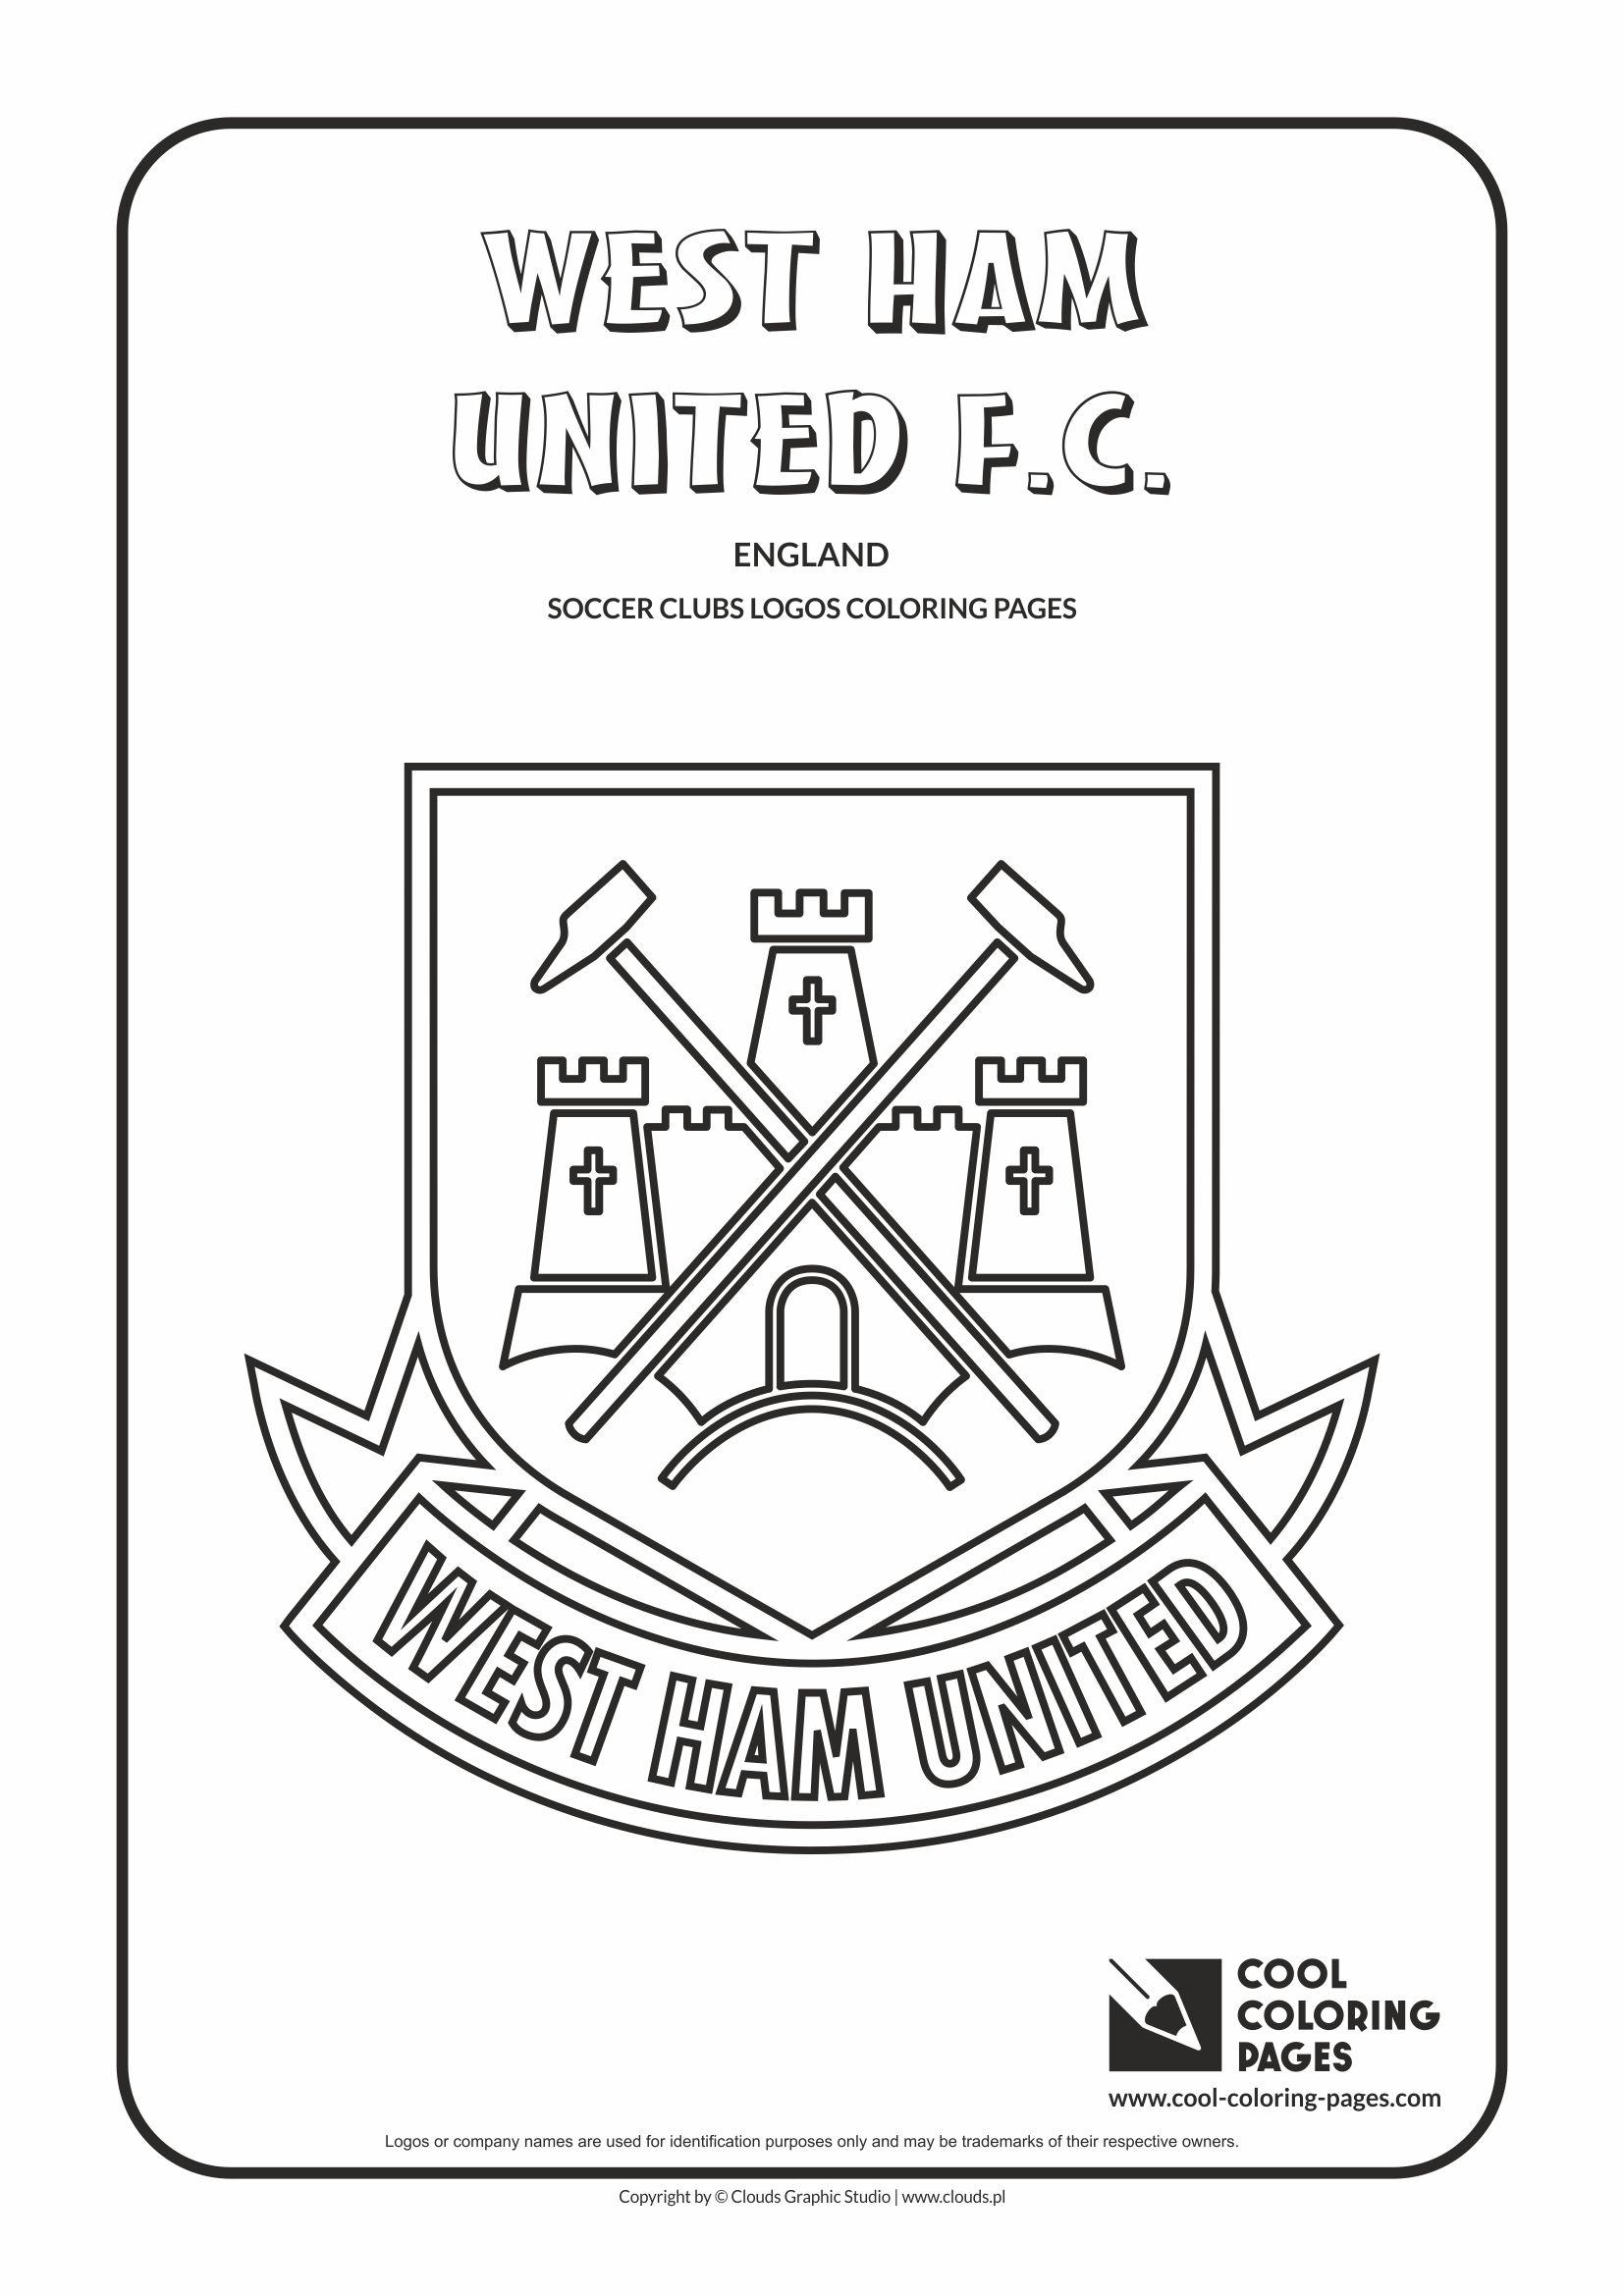 Cool Coloring Pages - Soccer Clubs Logos / West Ham United F.C. logo / Coloring page with West Ham United F.C. logo